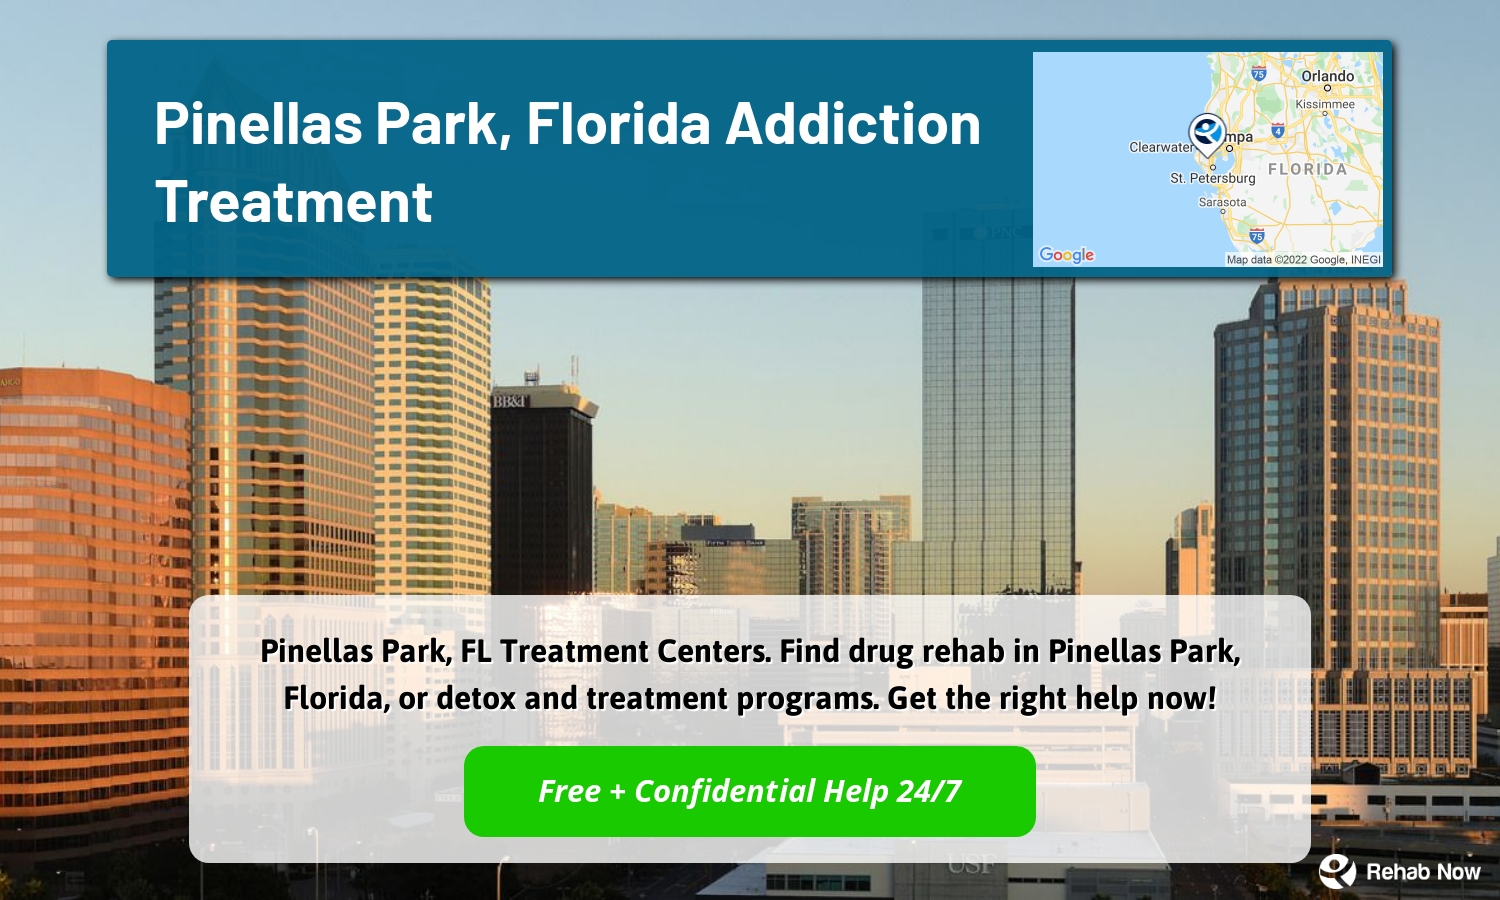 Pinellas Park, FL Treatment Centers. Find drug rehab in Pinellas Park, Florida, or detox and treatment programs. Get the right help now!